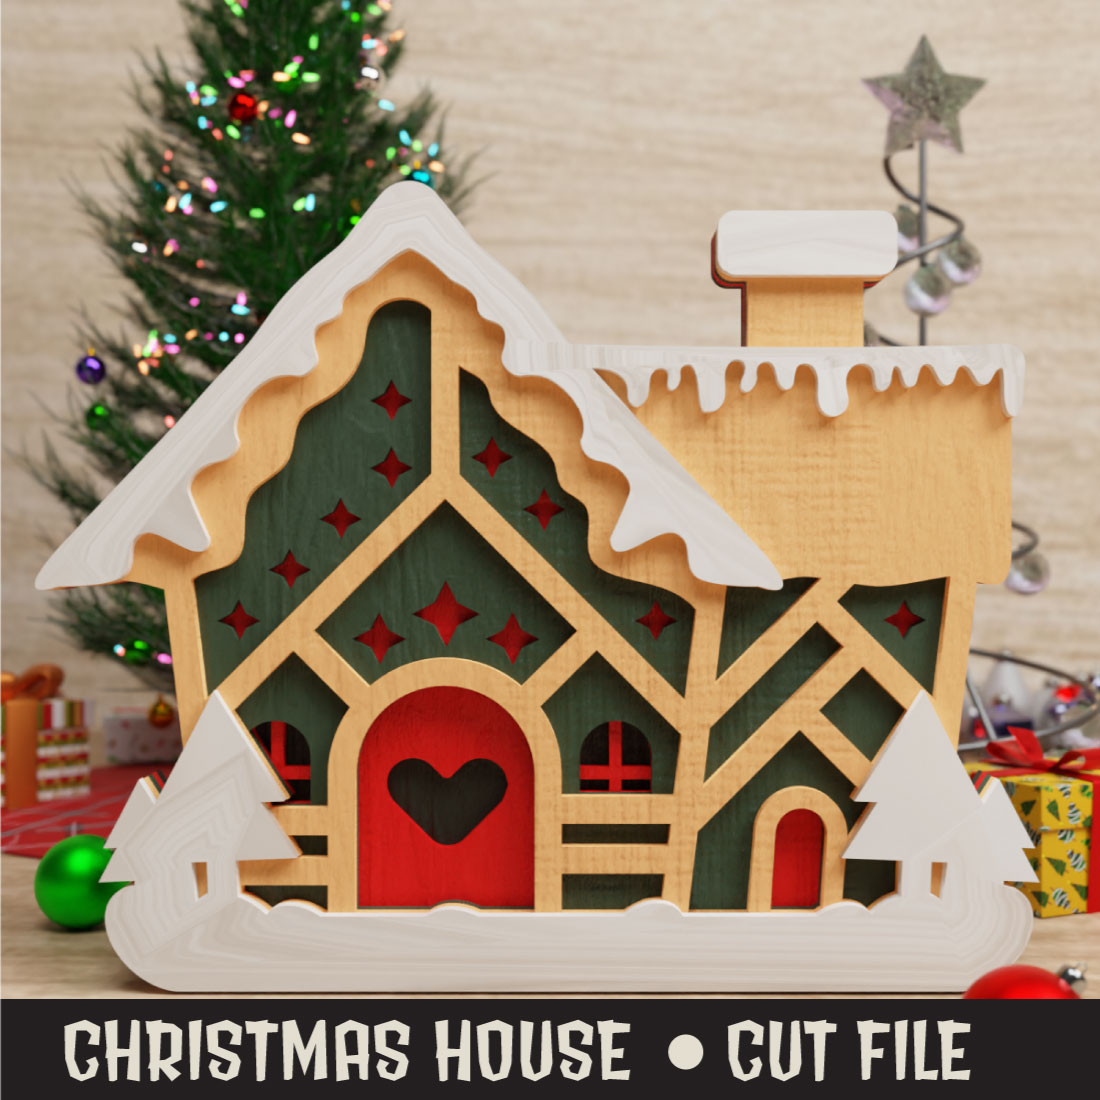 Cute Christmas House 3D SVG Multilayered cover image.